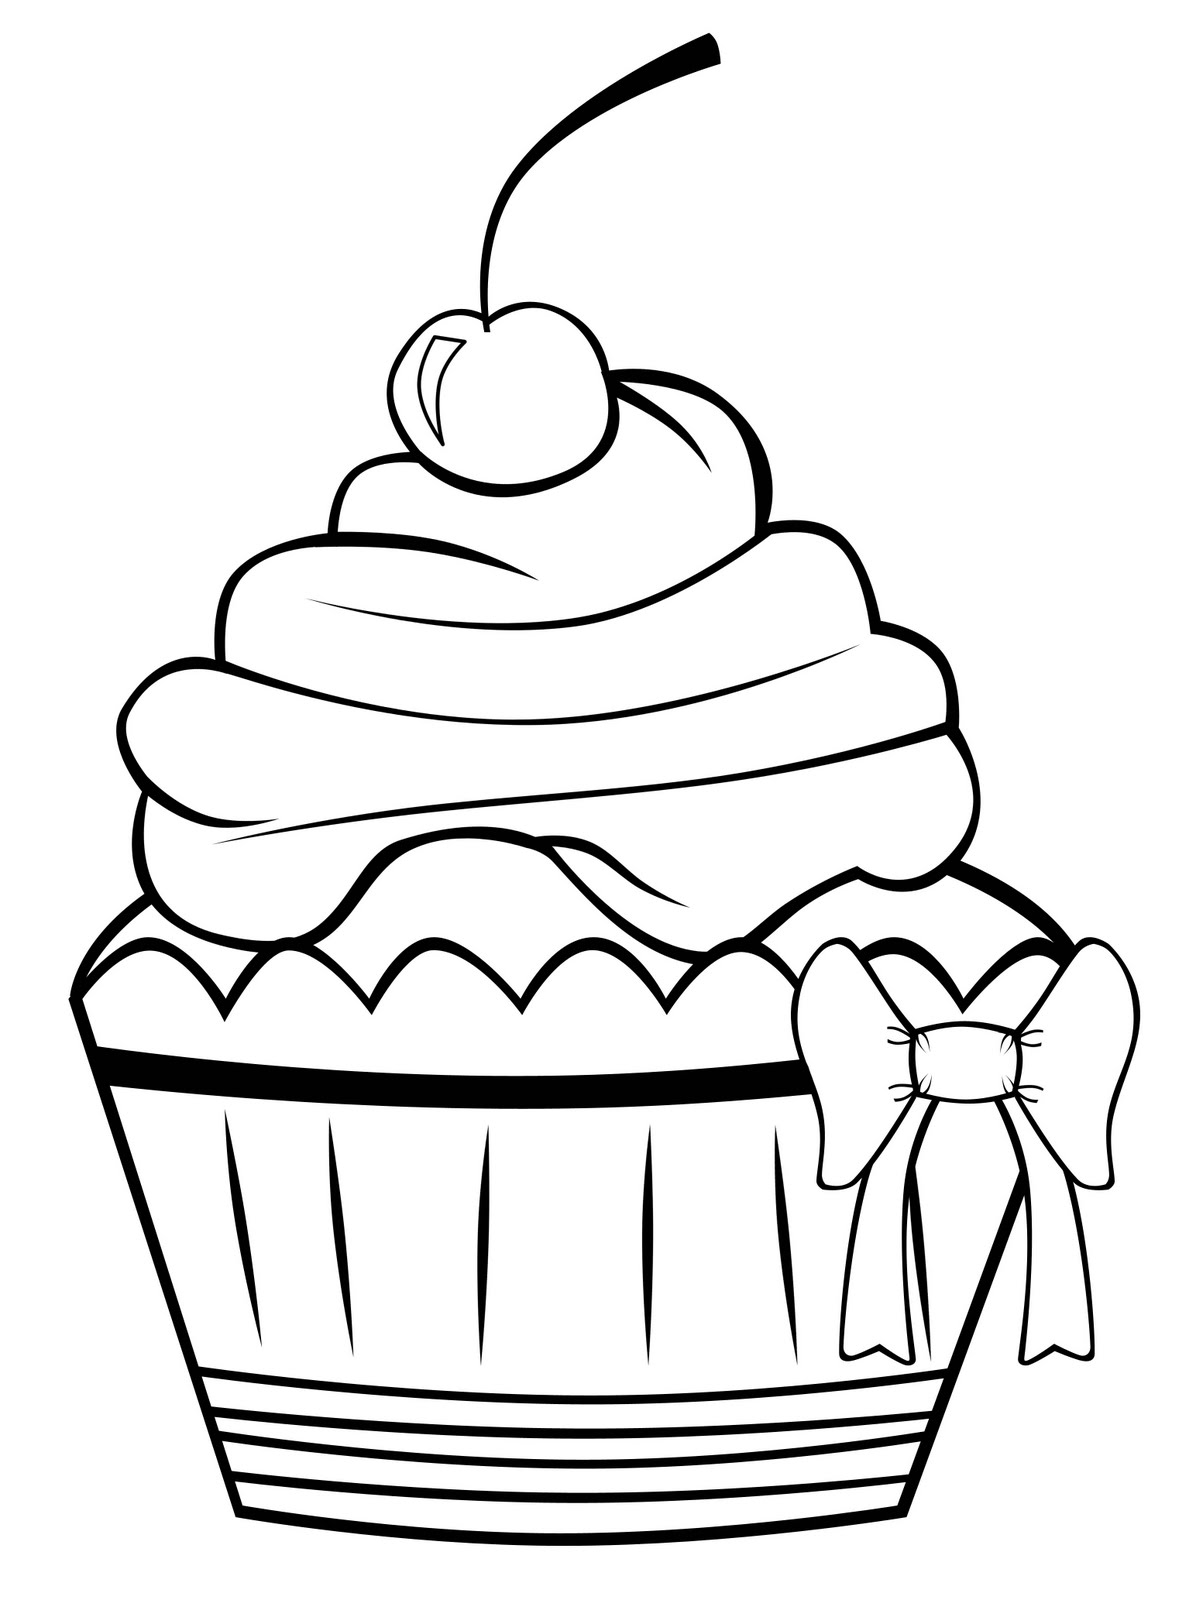 Colouring In Pictures Of Making Cupcakes | Free coloring pages for ...